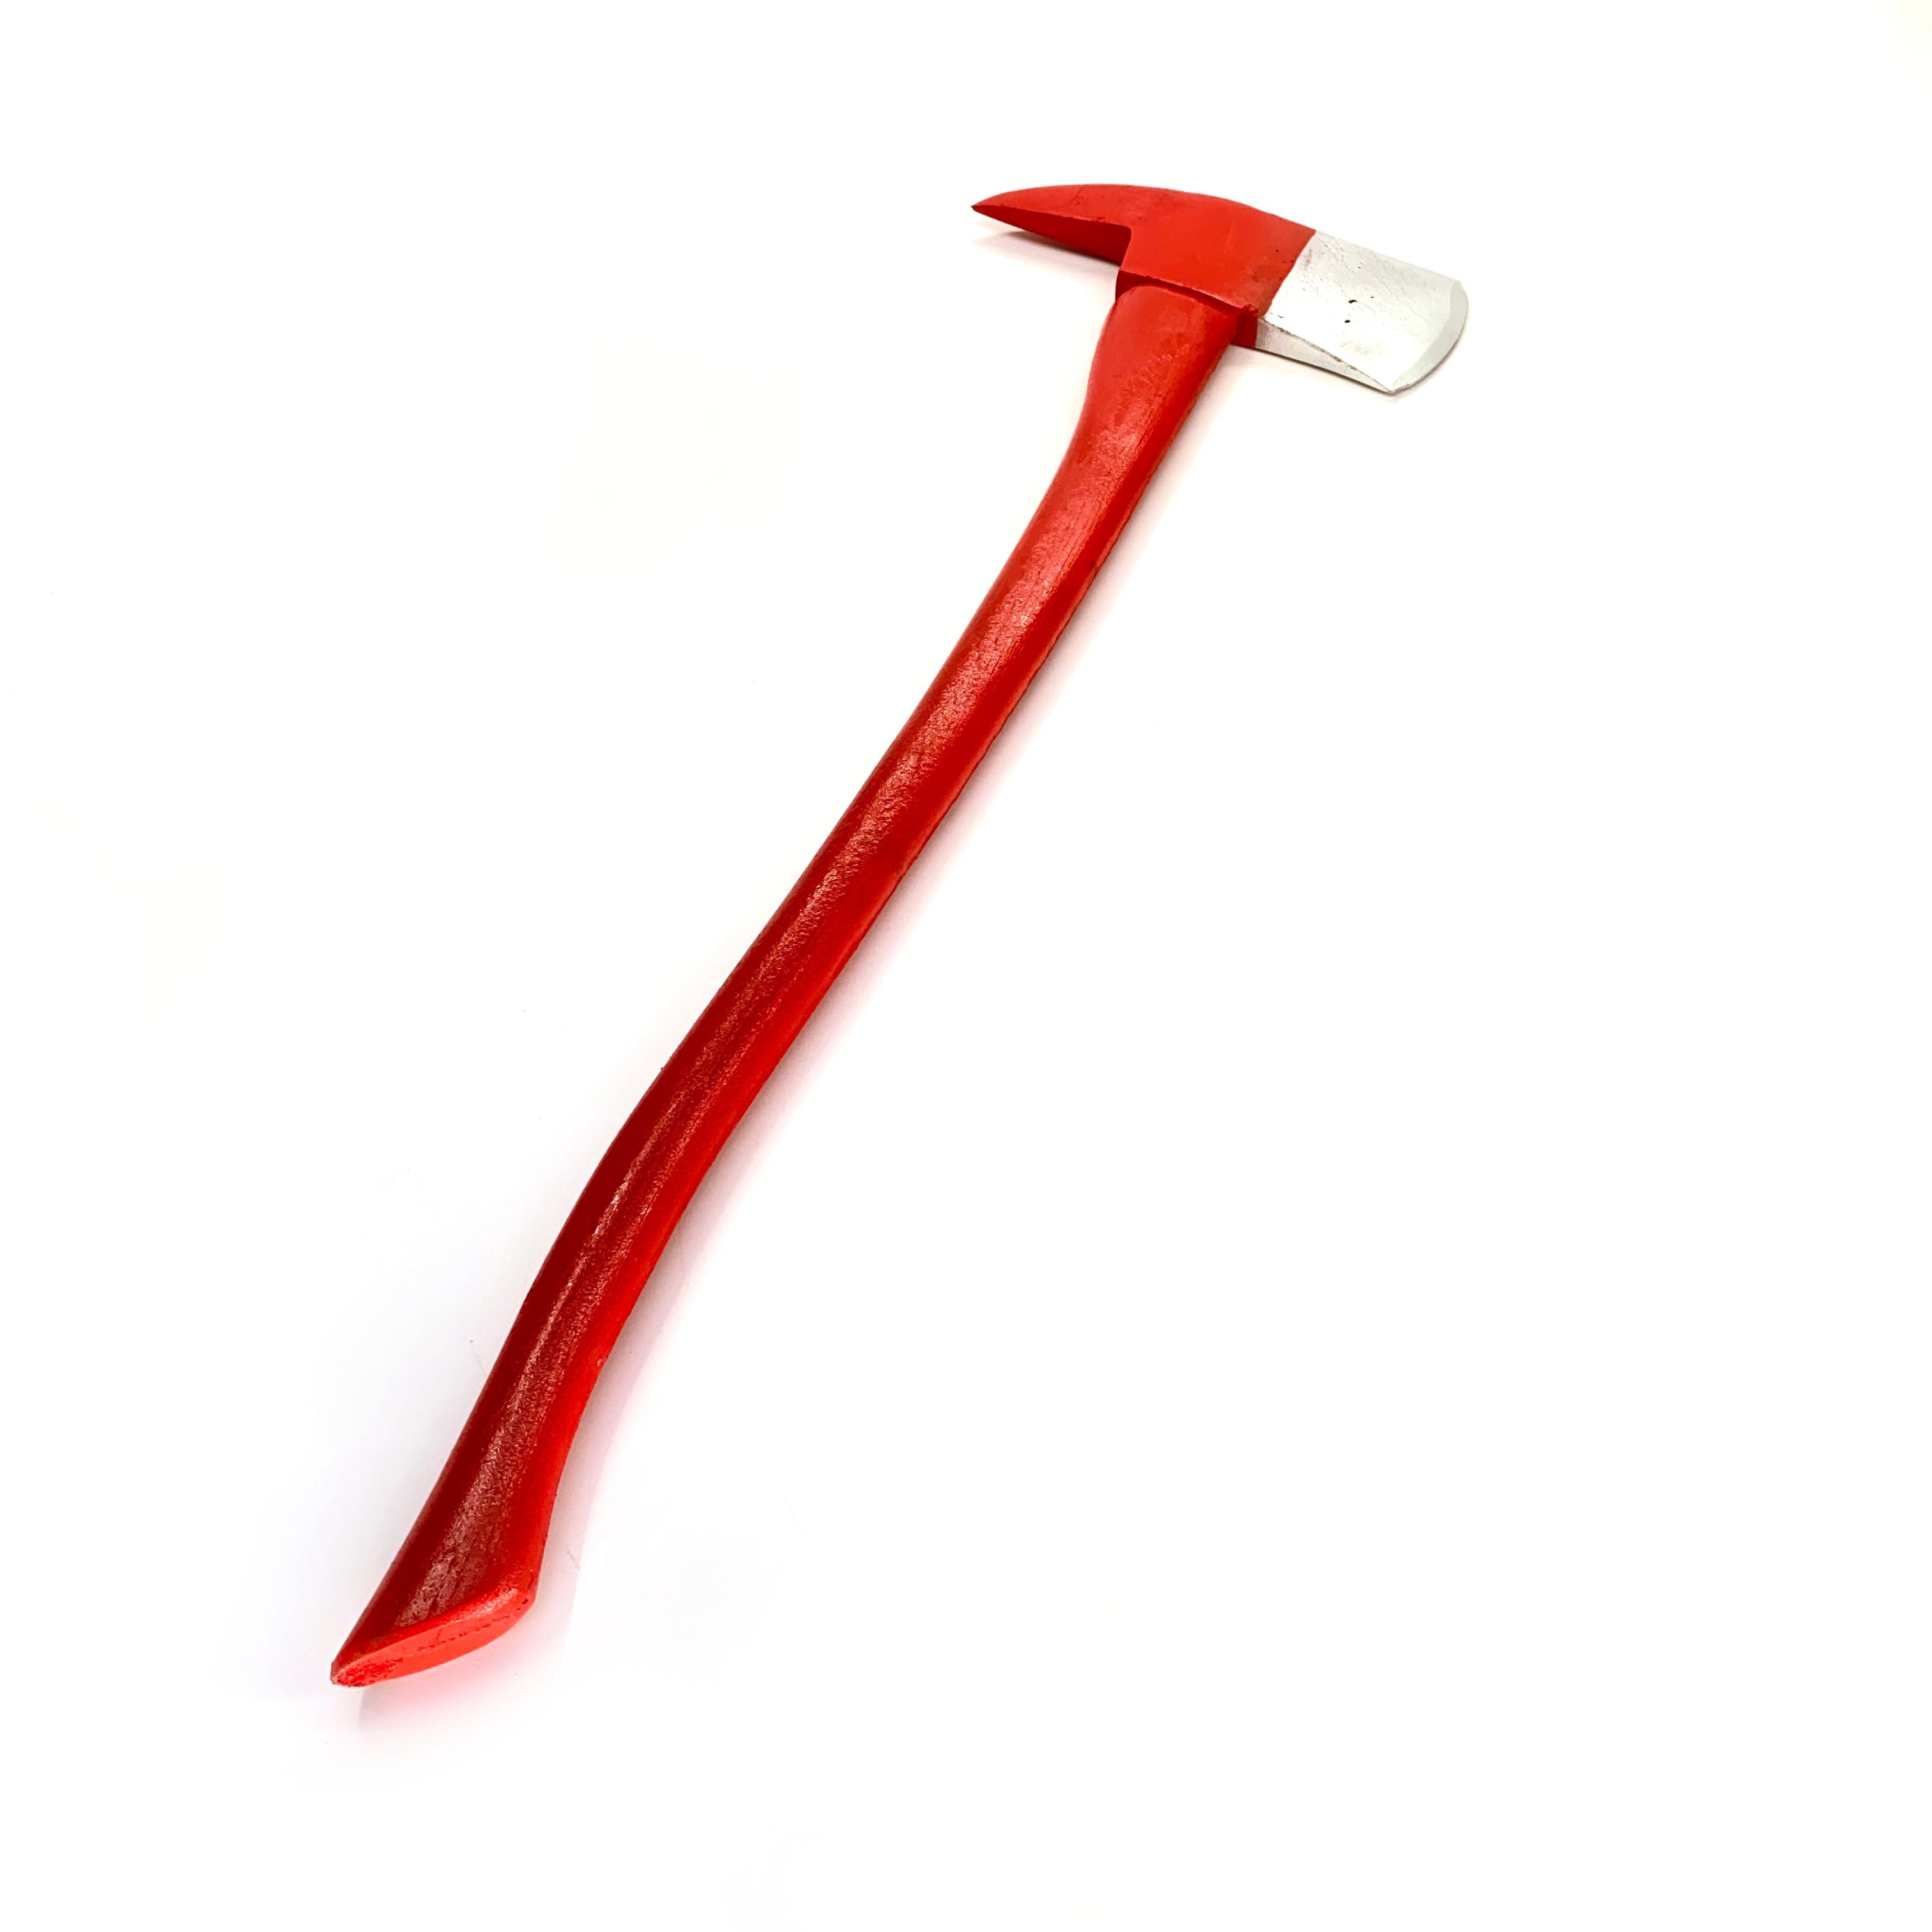 36 Inch Firefighter / Fireman's Axe Urethane Foam Rubber Stunt Prop - RED / SILVER - Red and Silver Head with Red Handle